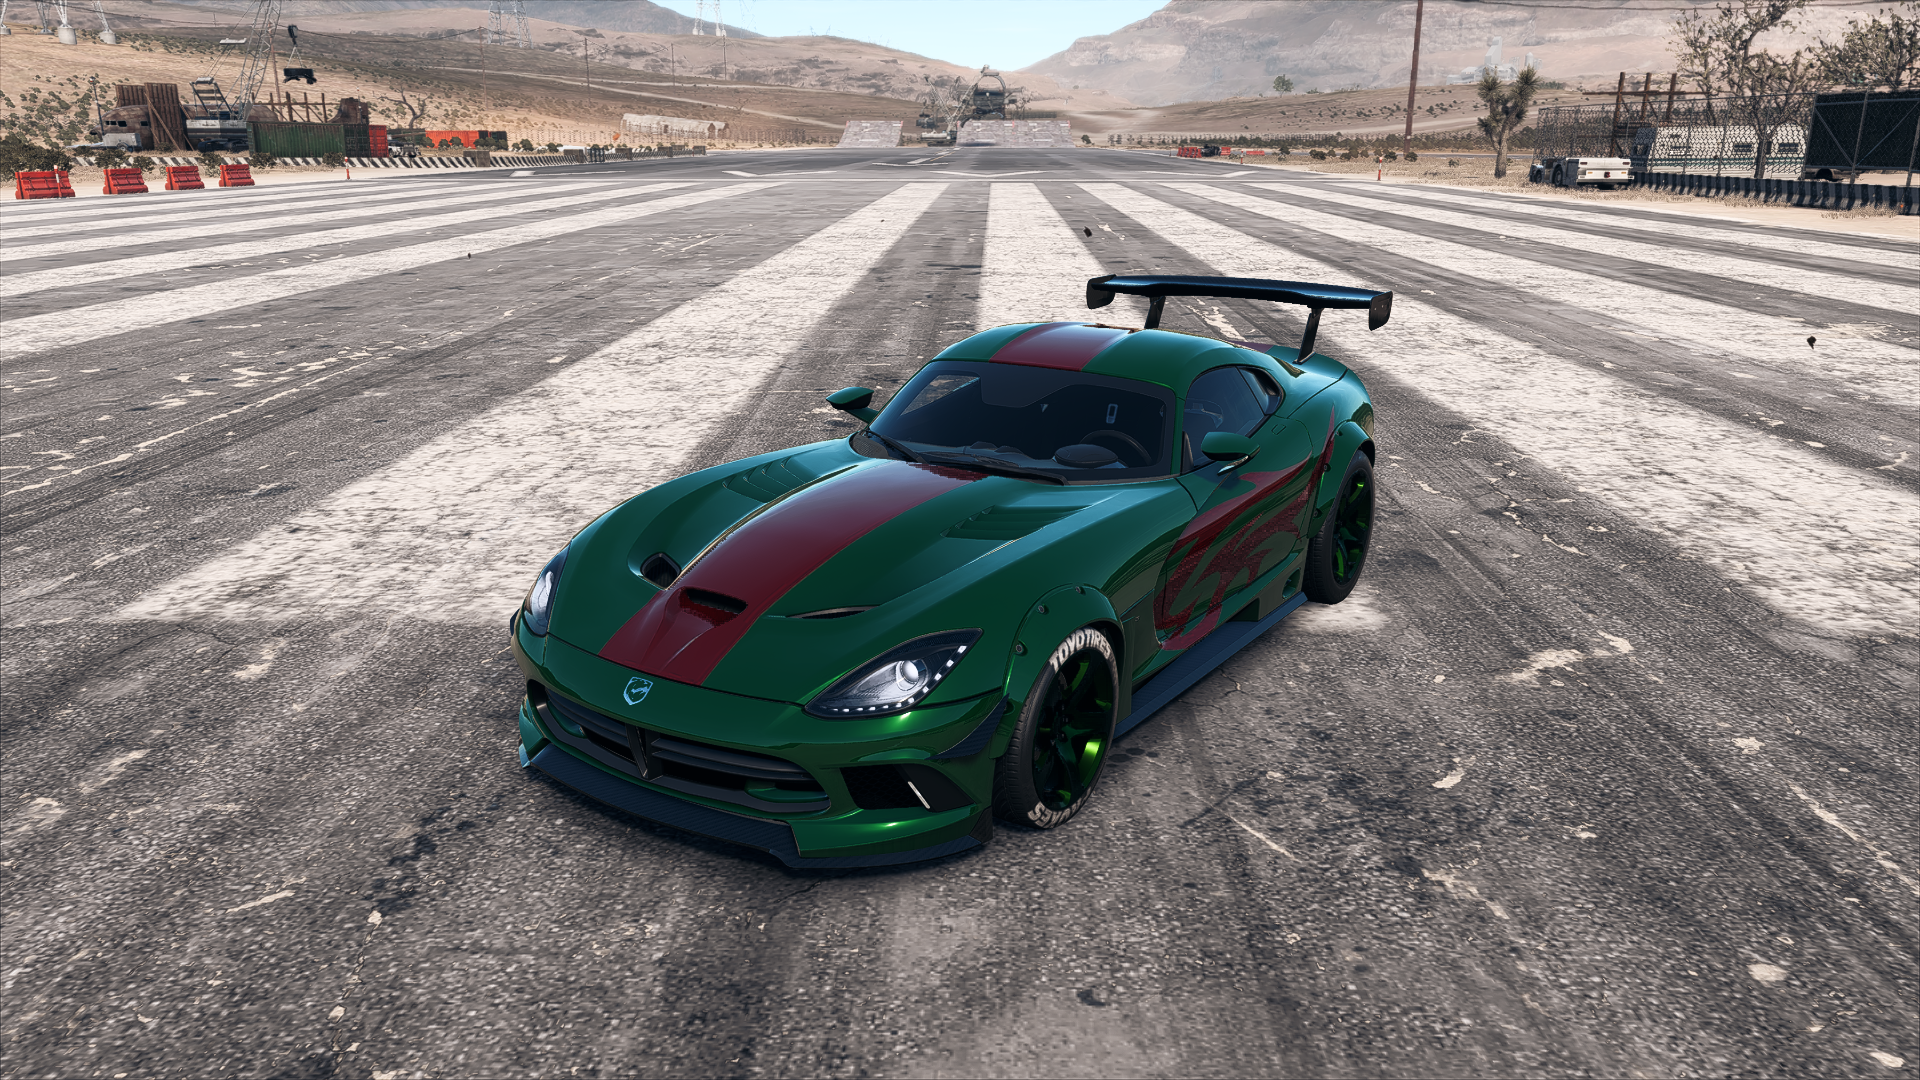 General 1920x1080 Need for Speed Need for Speed Payback Dodge Dodge Viper video games Electronic Arts Stellantis American cars Ghost Games V10 engine bodykit